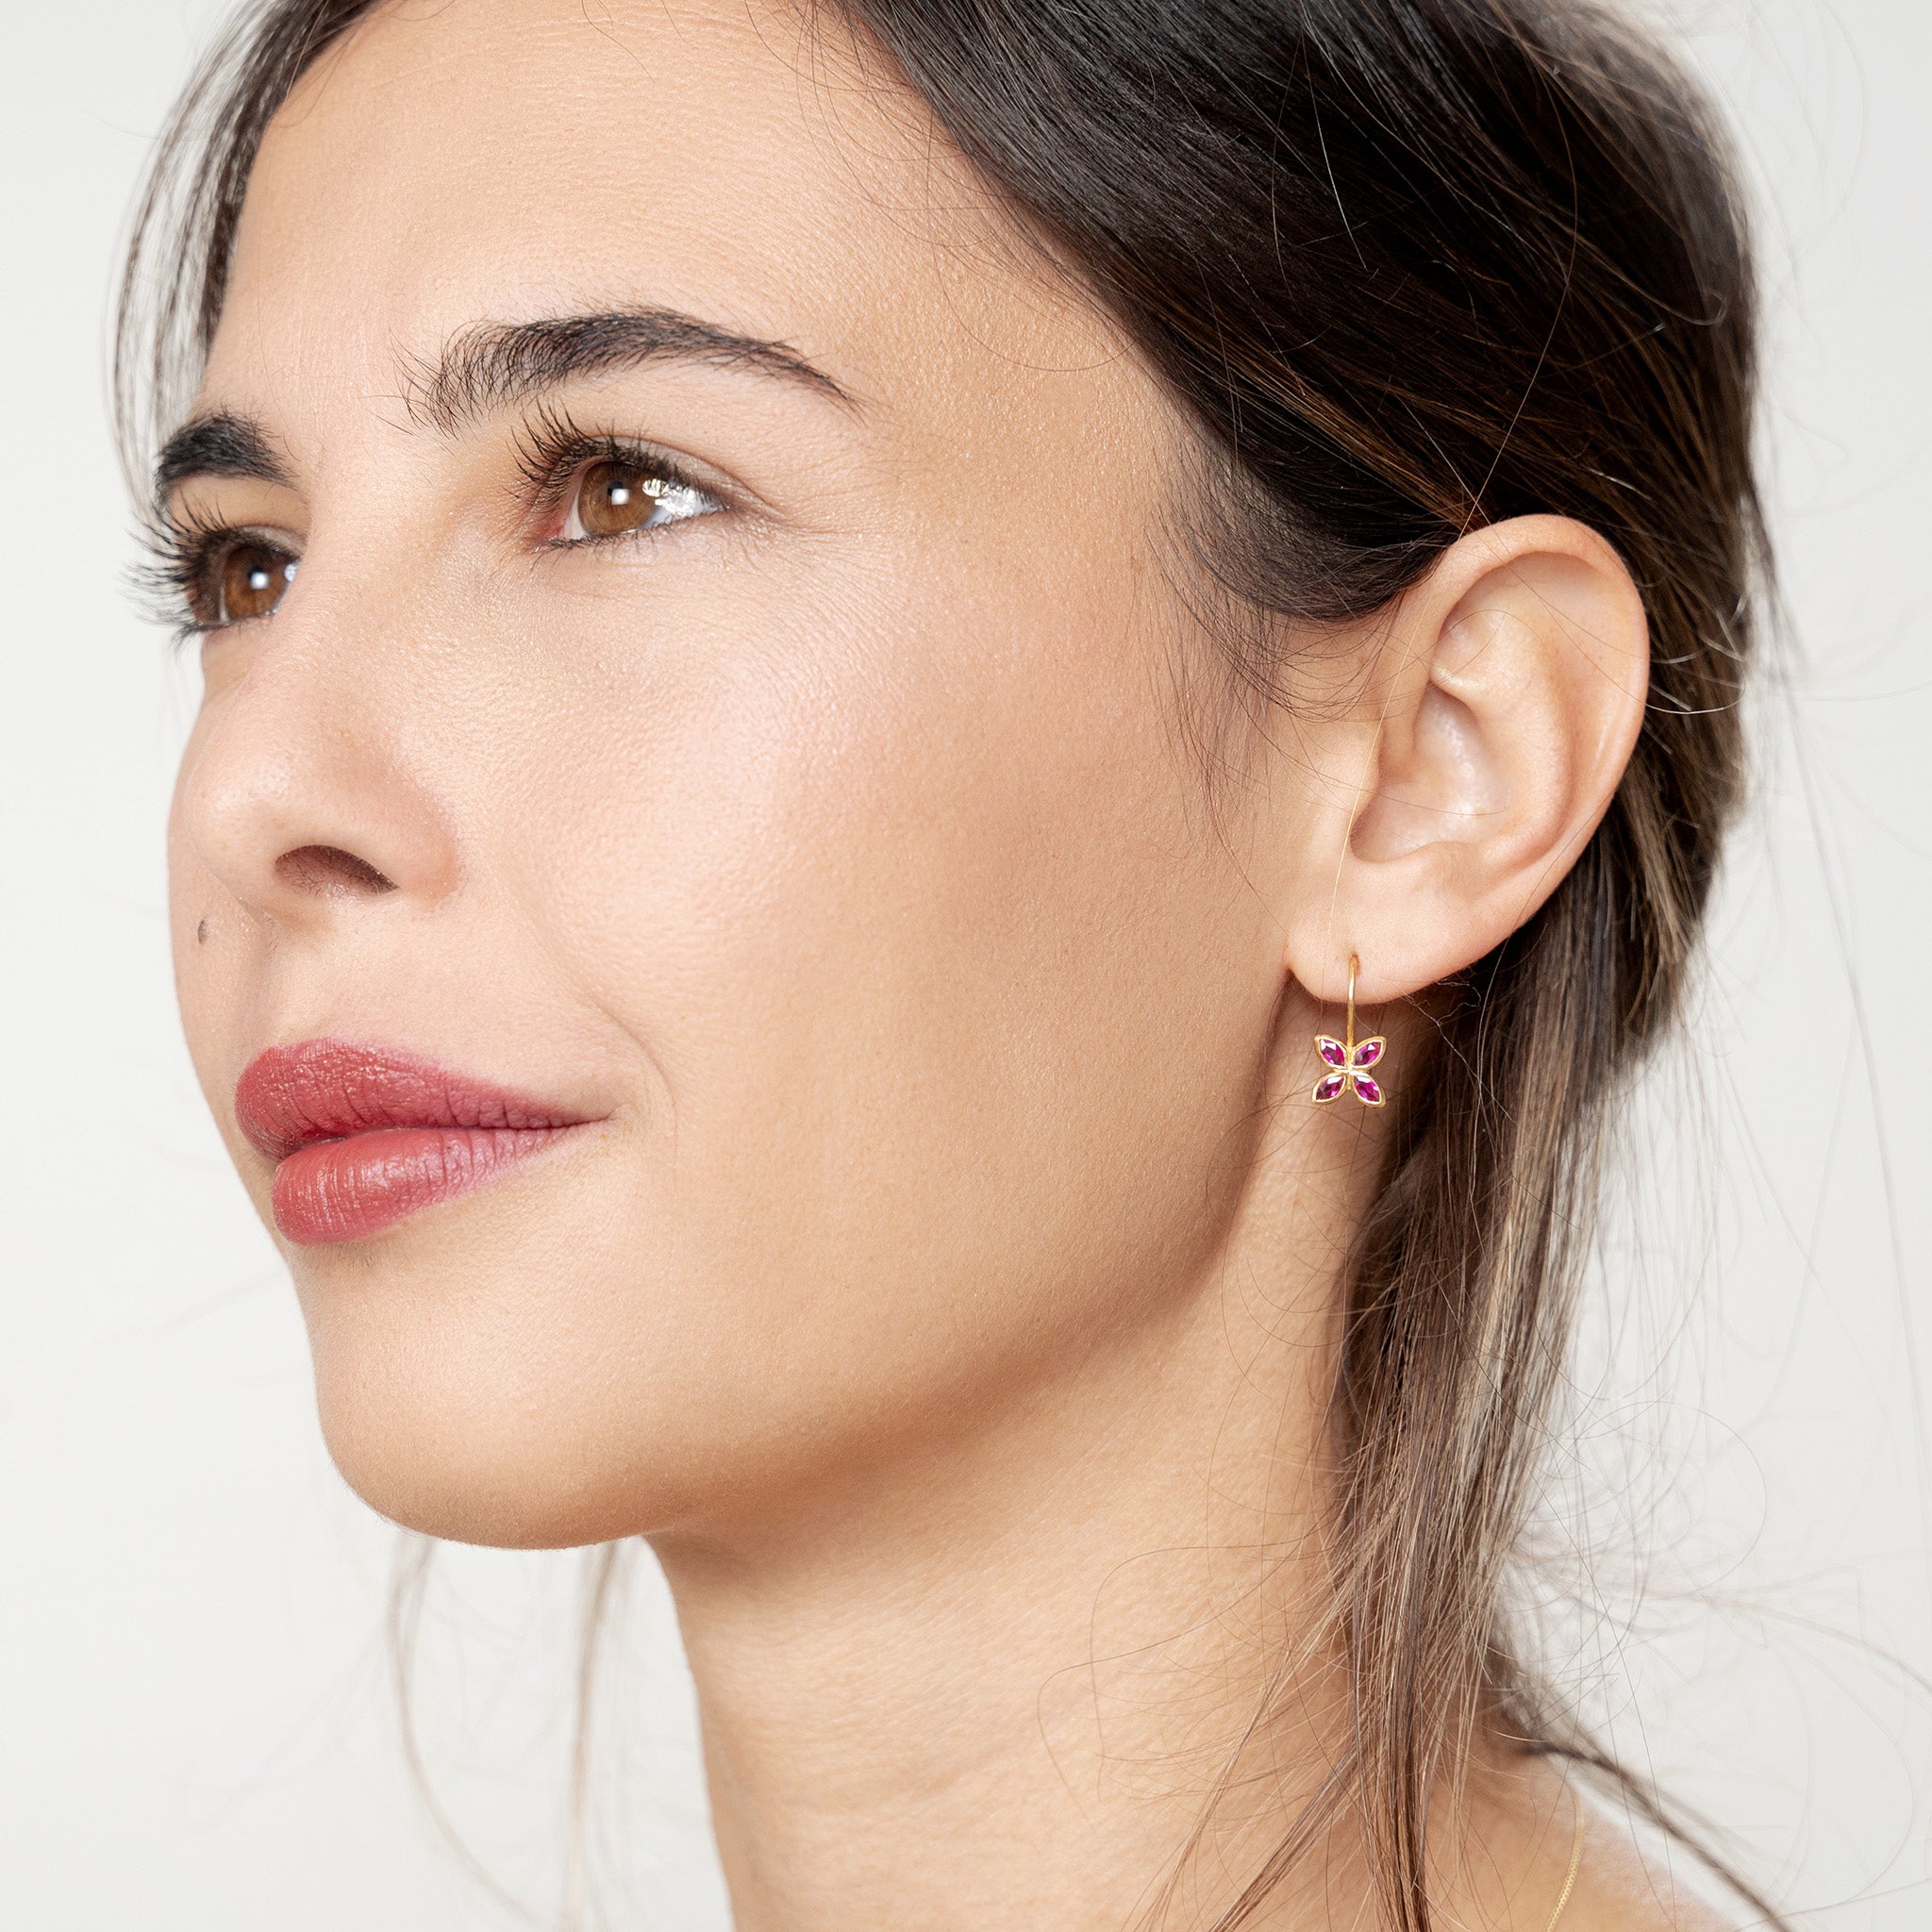 Model wearing Dazzling Ruby flower earrings, crafted from 4 marquise gemstones. Lightweight, colorful and vibrant.